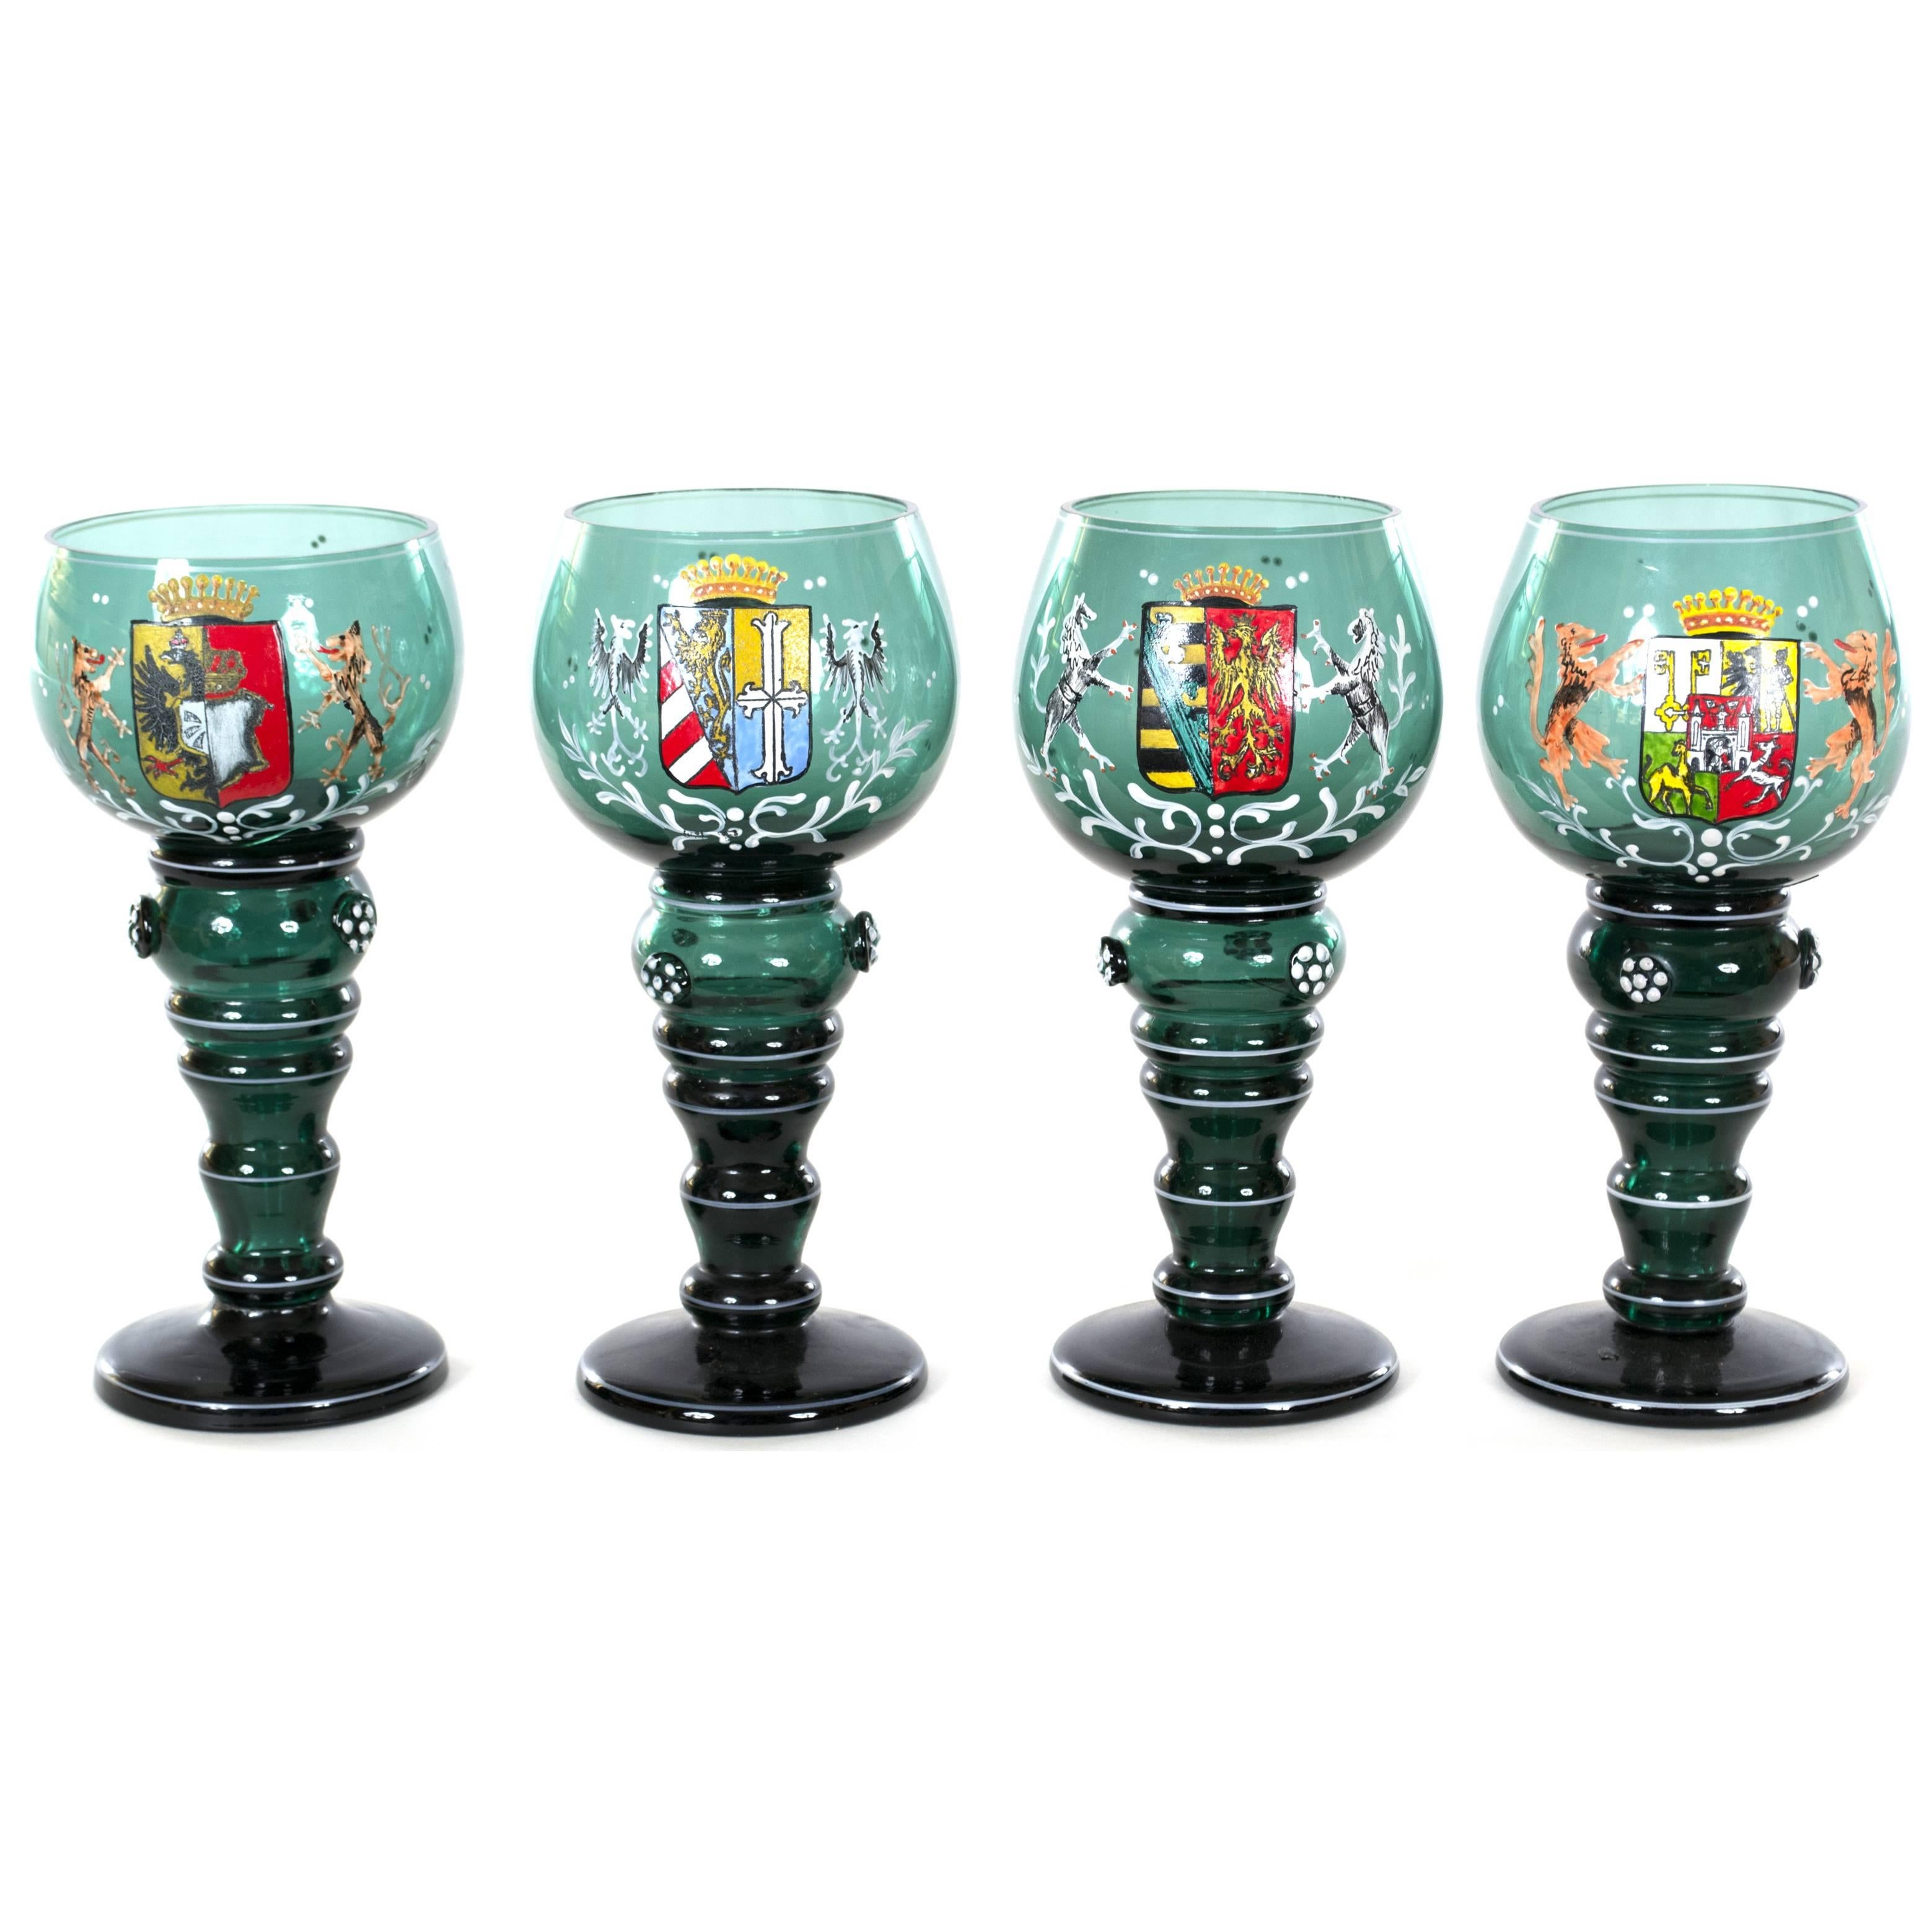 Set of Four Czech Glass Goblets with Coats of Arms